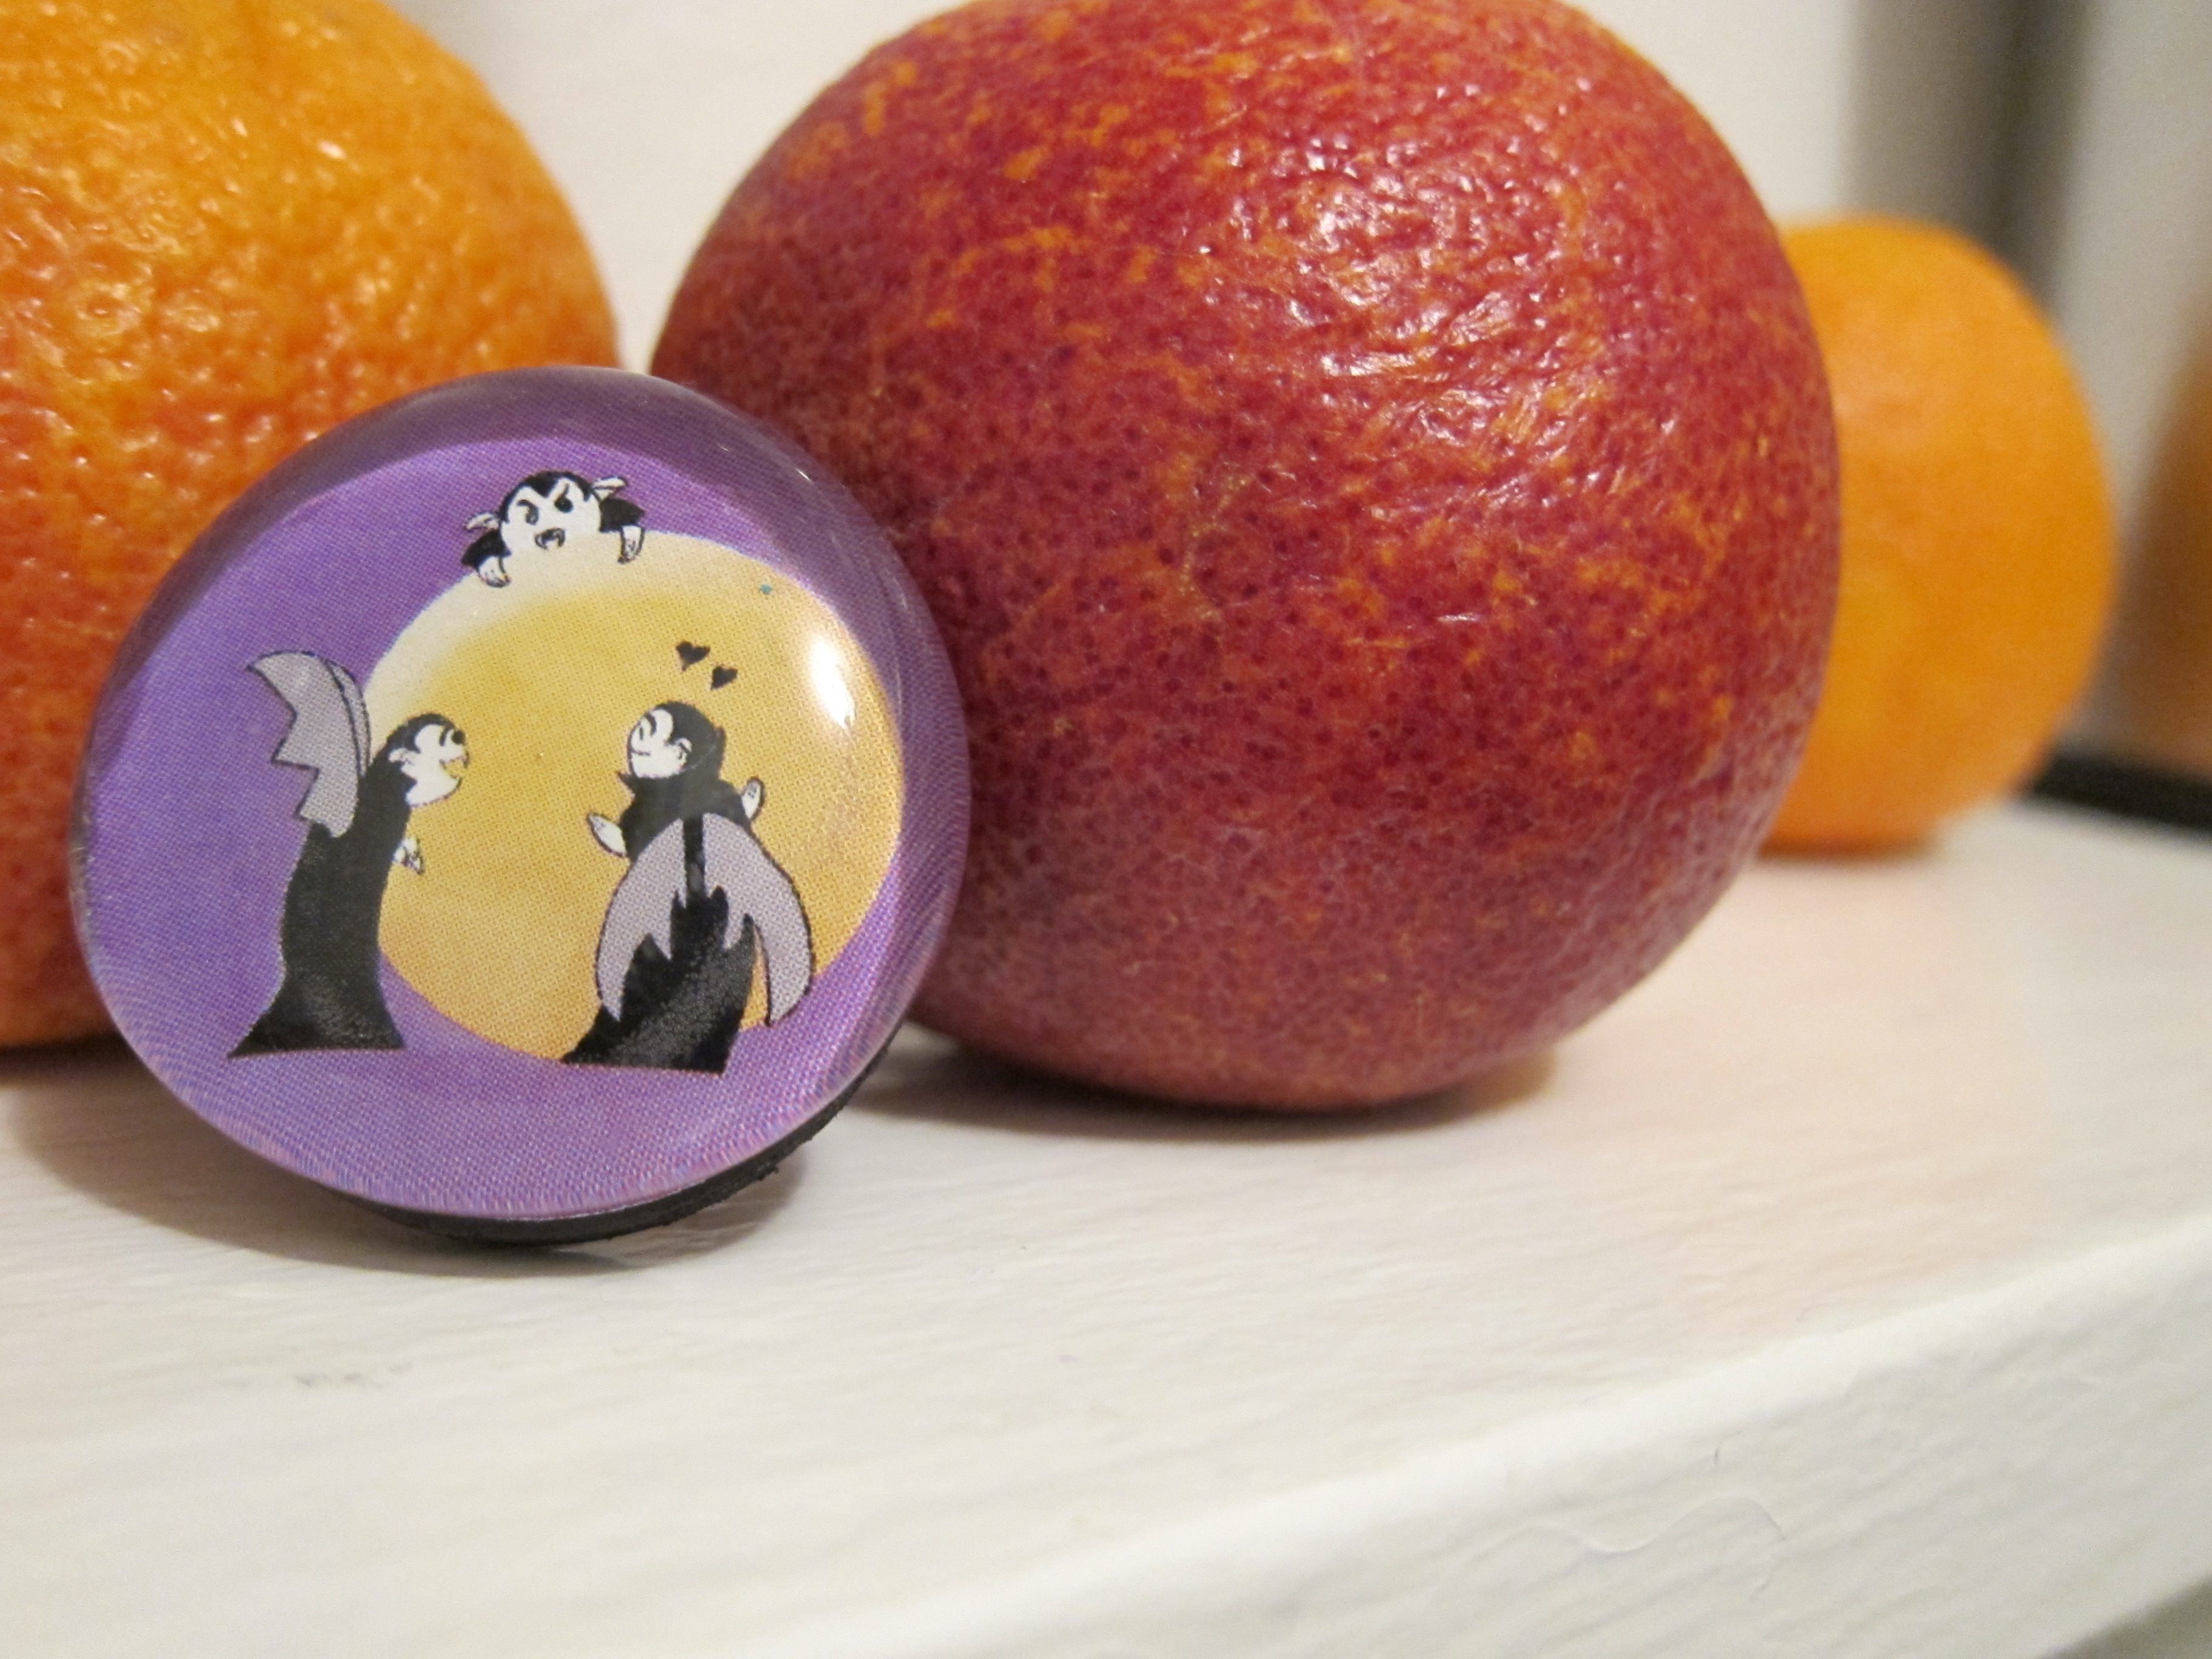 Photo of a Little Vampires glass refrigerator magnet depicting Little Vampirea and a blood orange. The magnet is arranged with a few real blood oranges.